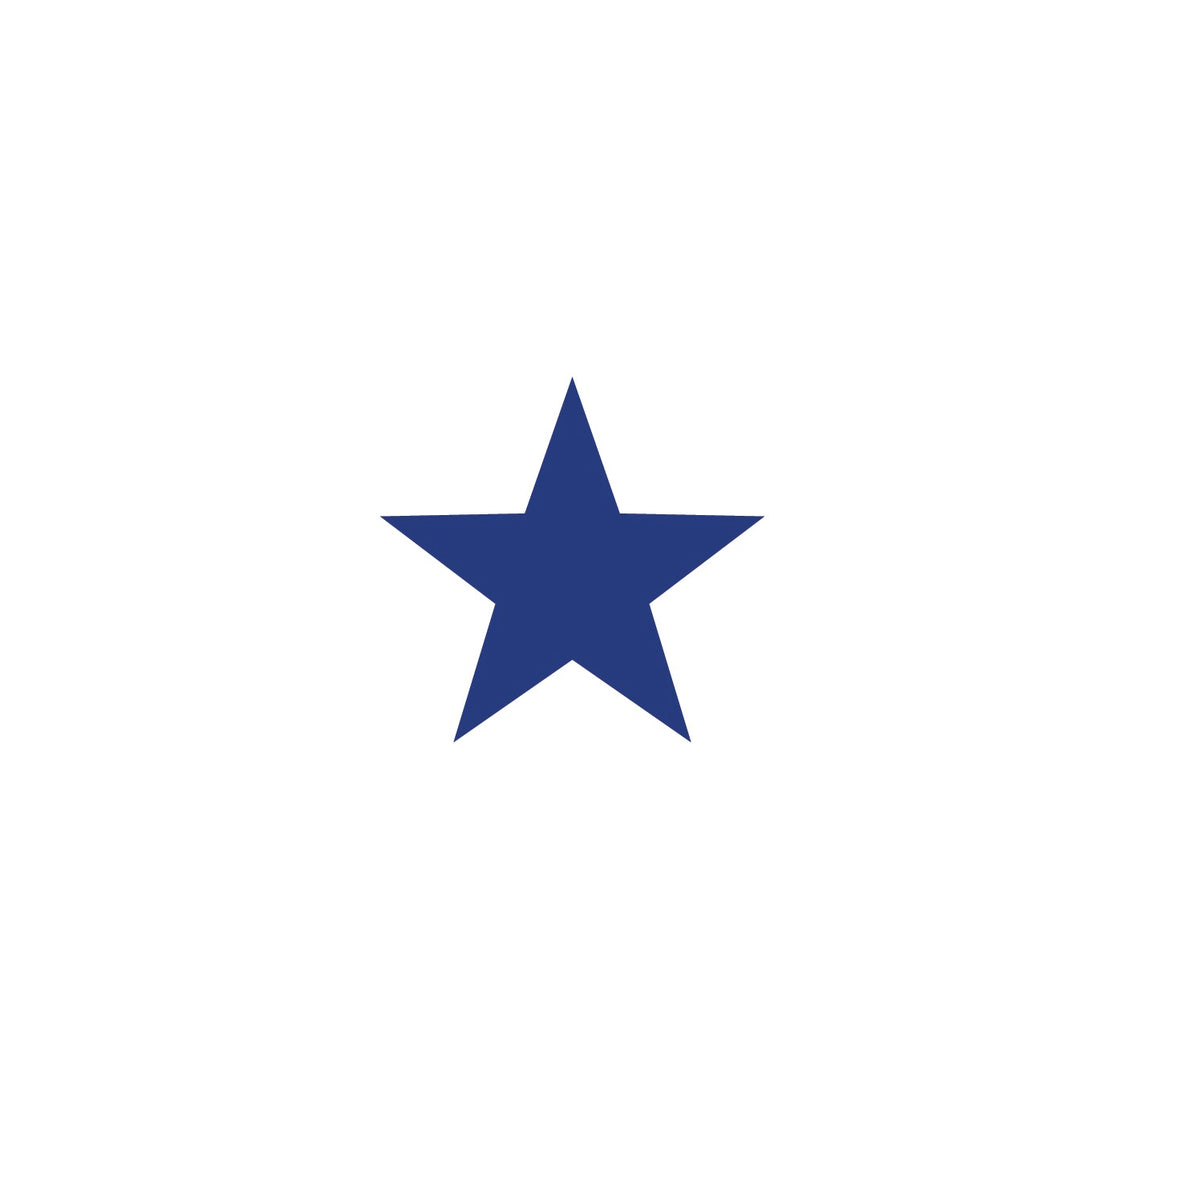 A dark blue five-pointed star, symbolizing the 50 States, centered on a plain white background can be found in the Red, White or Blue Star Decals from Cover-Alls.